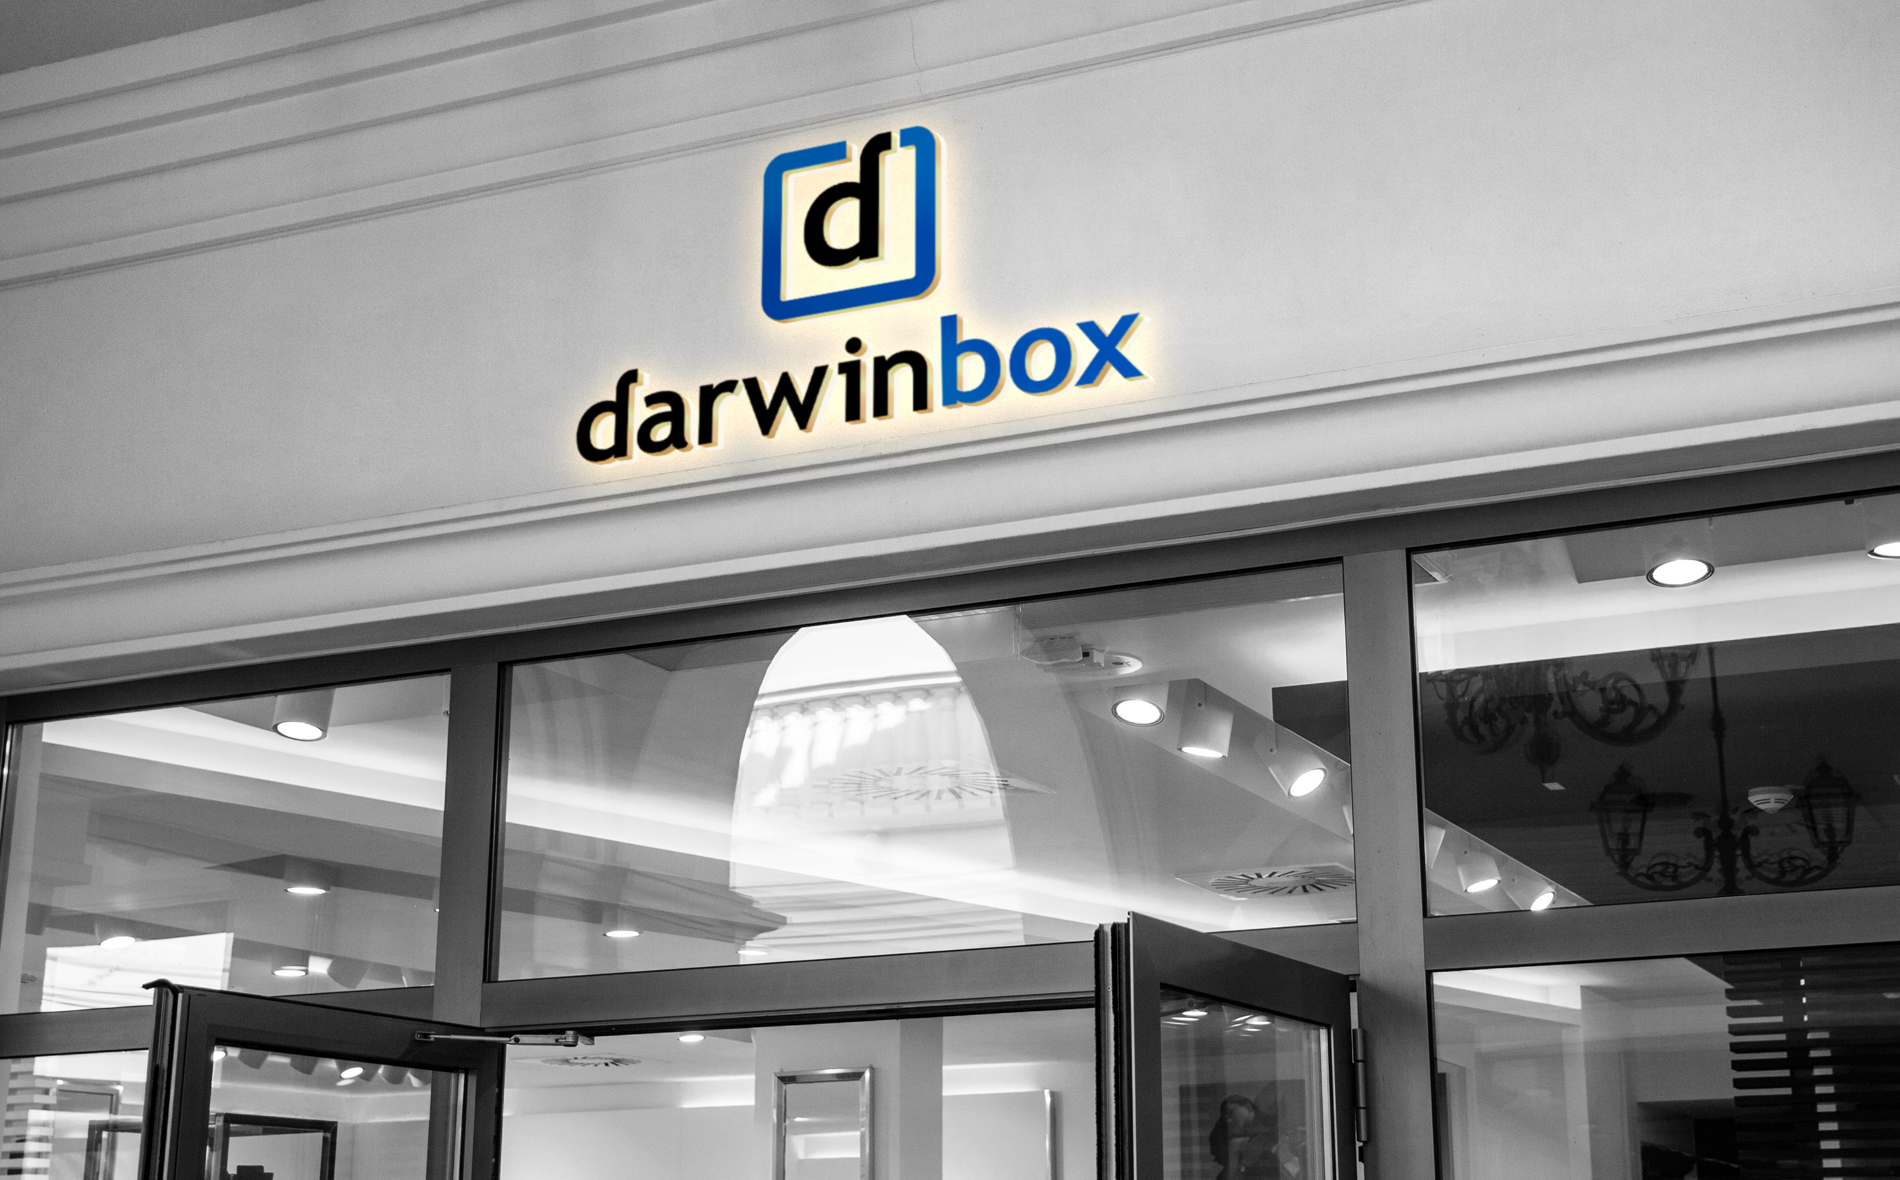 Asia's Leading HR tech Platform Darwinbox Raises $72 mn Funding Led by TCV  | Inspiring Business News Stories from Asia